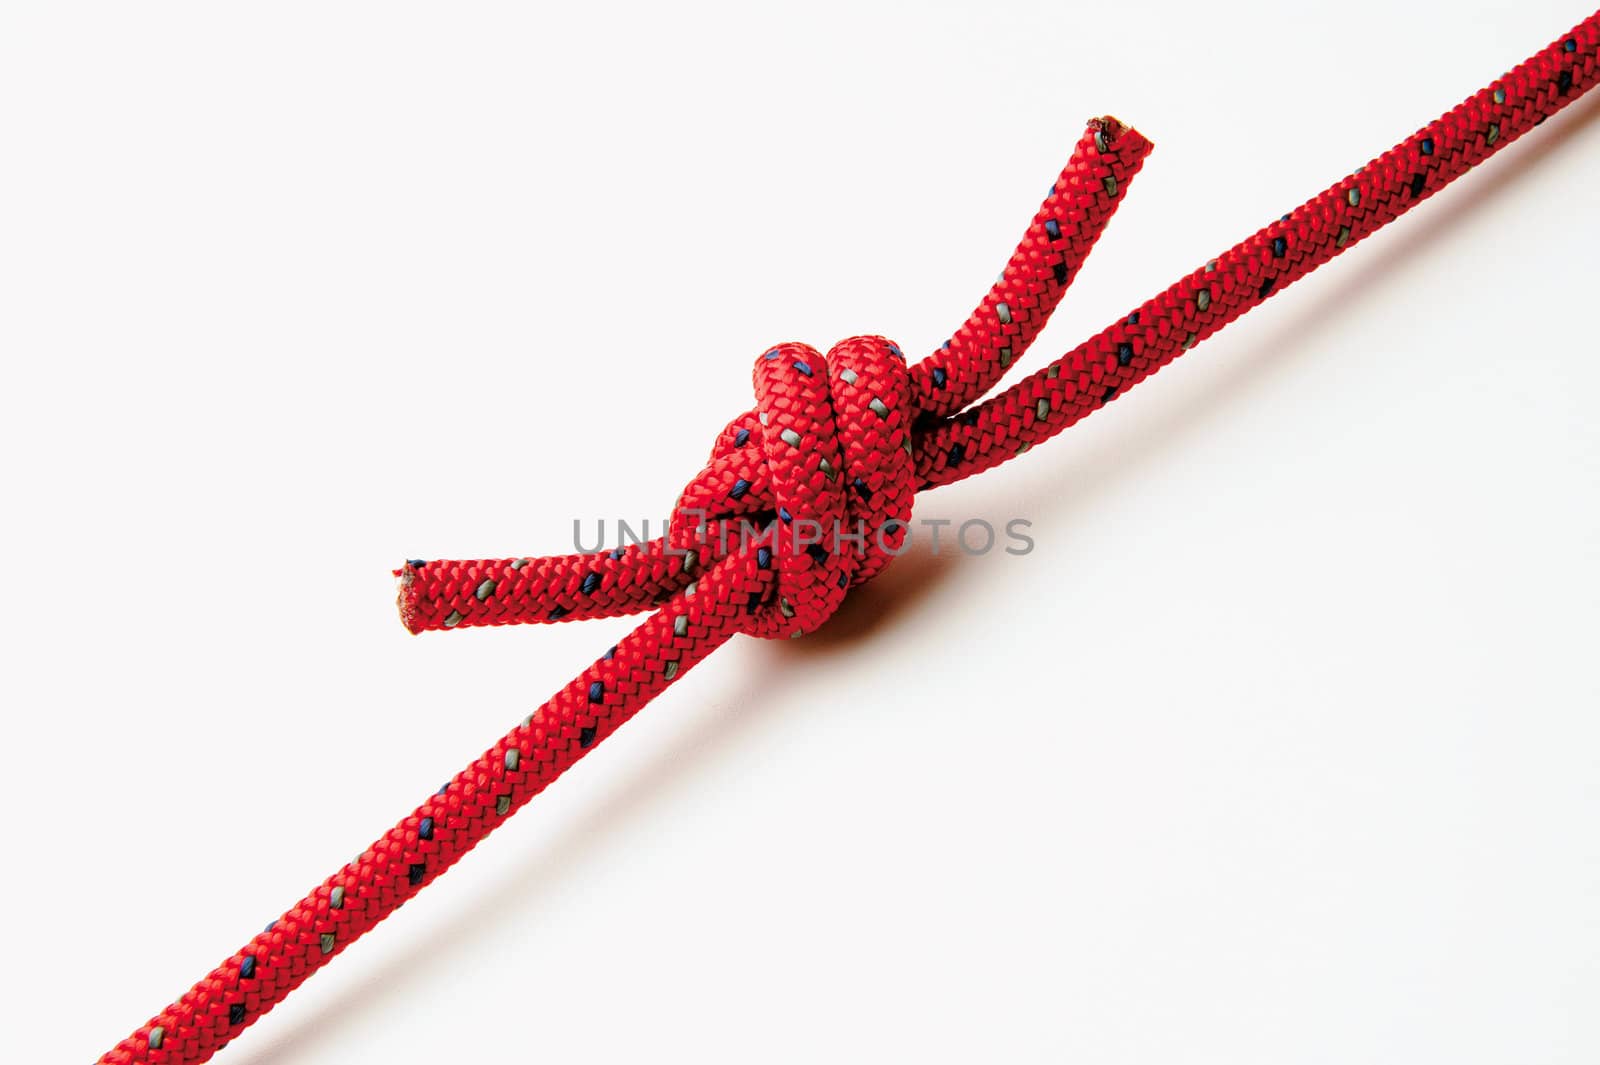 A knot on very strong climber red rope